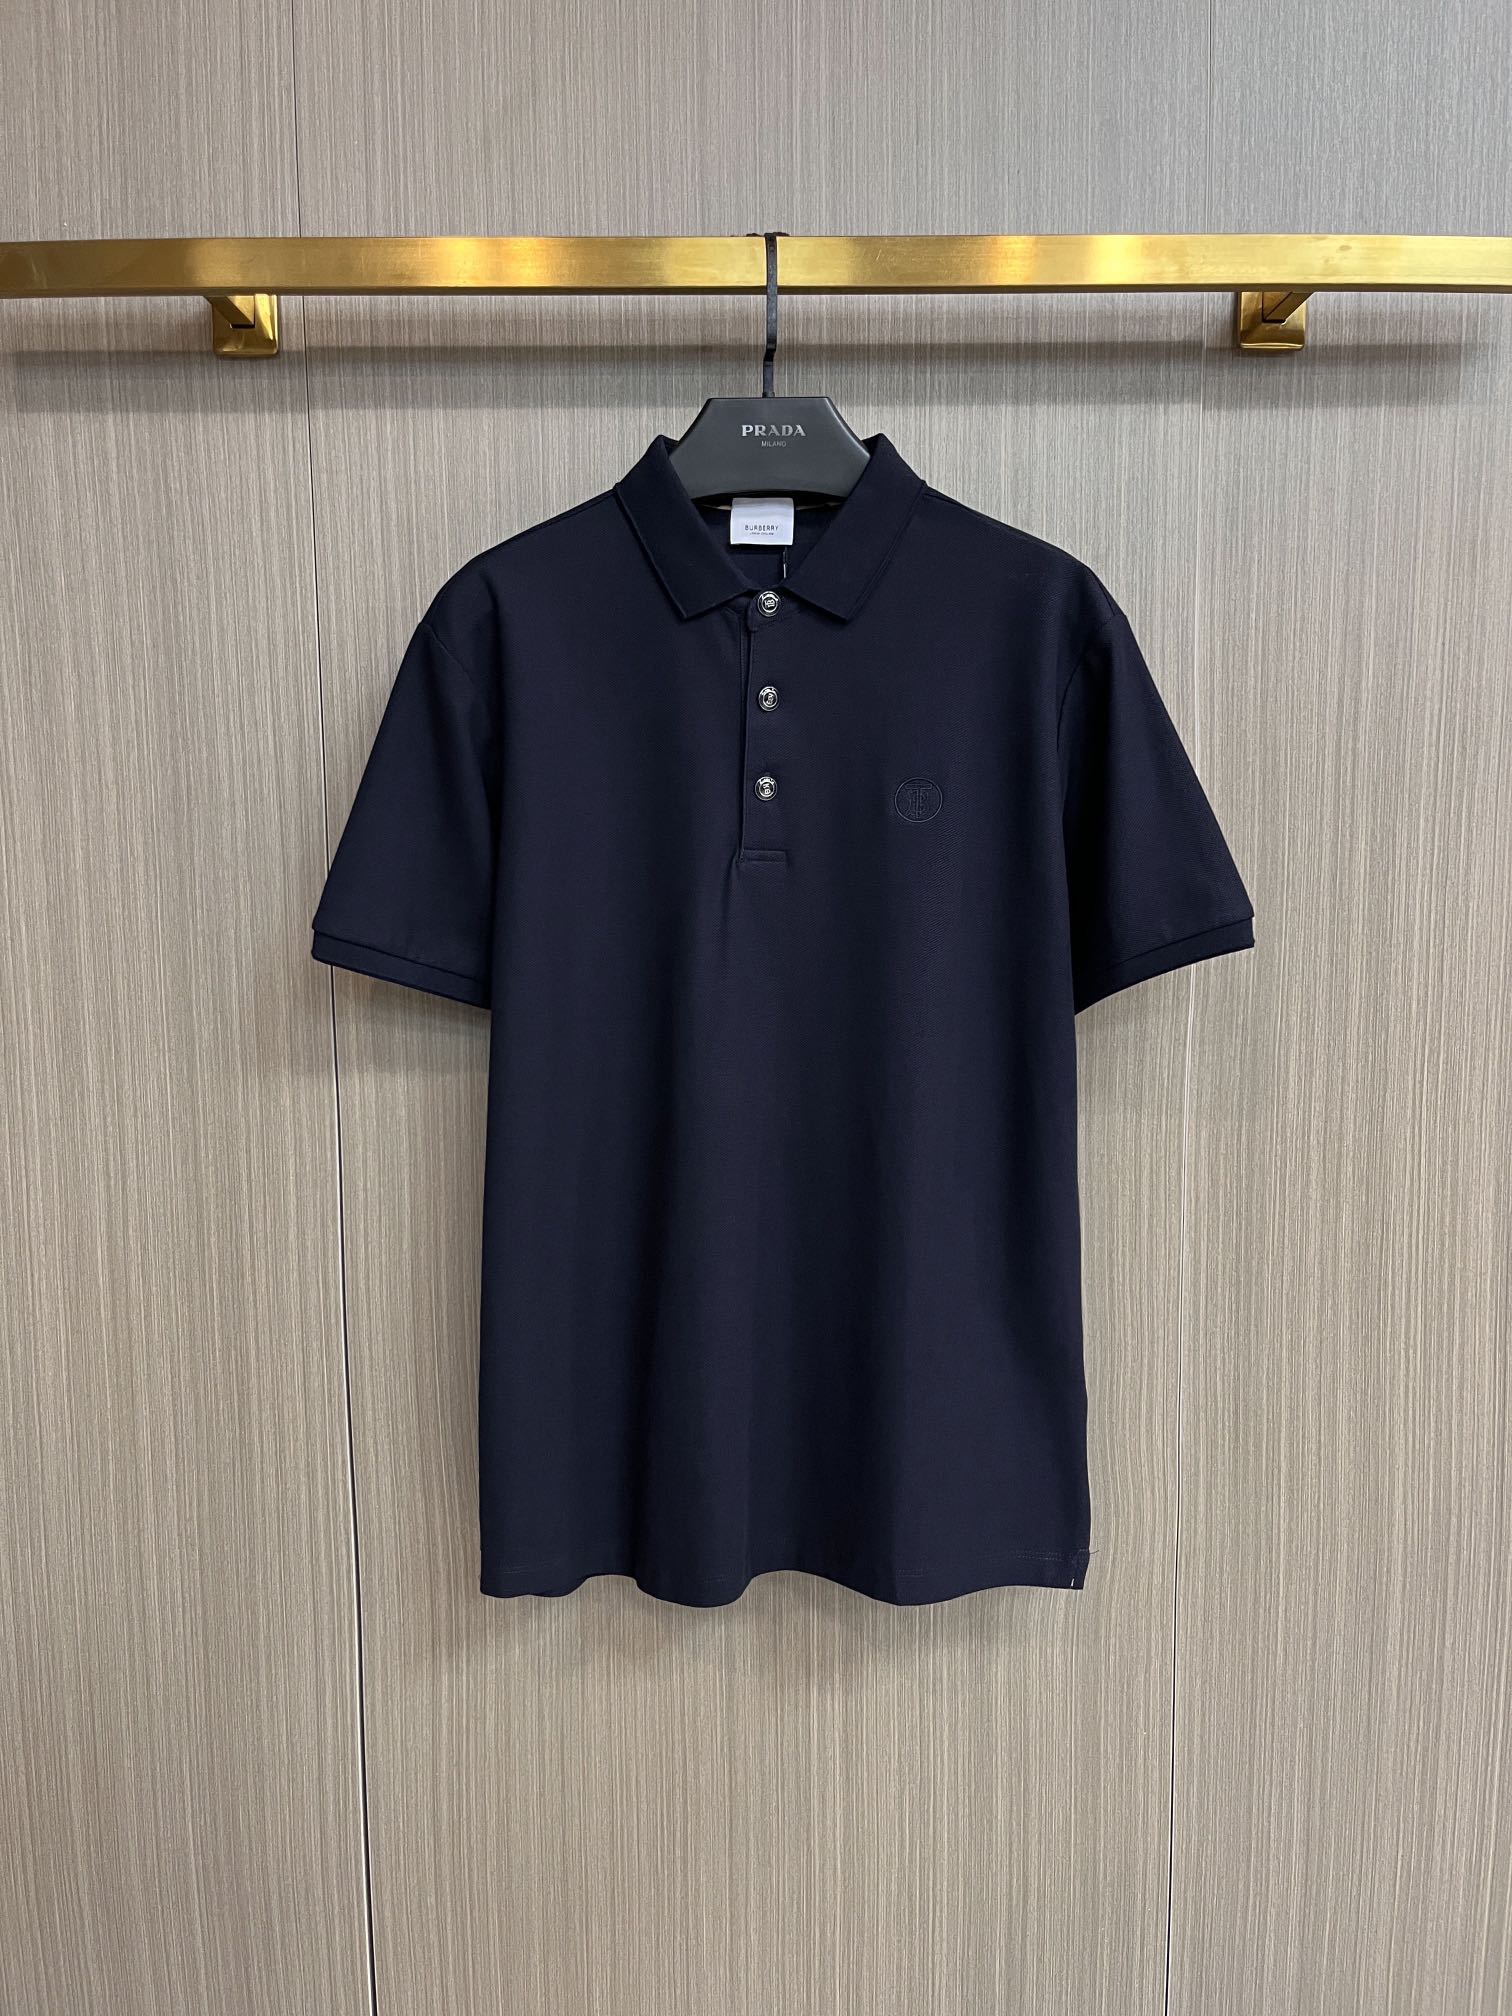 Burberry Flawless
 Clothing Polo Men Cotton Summer Collection Fashion